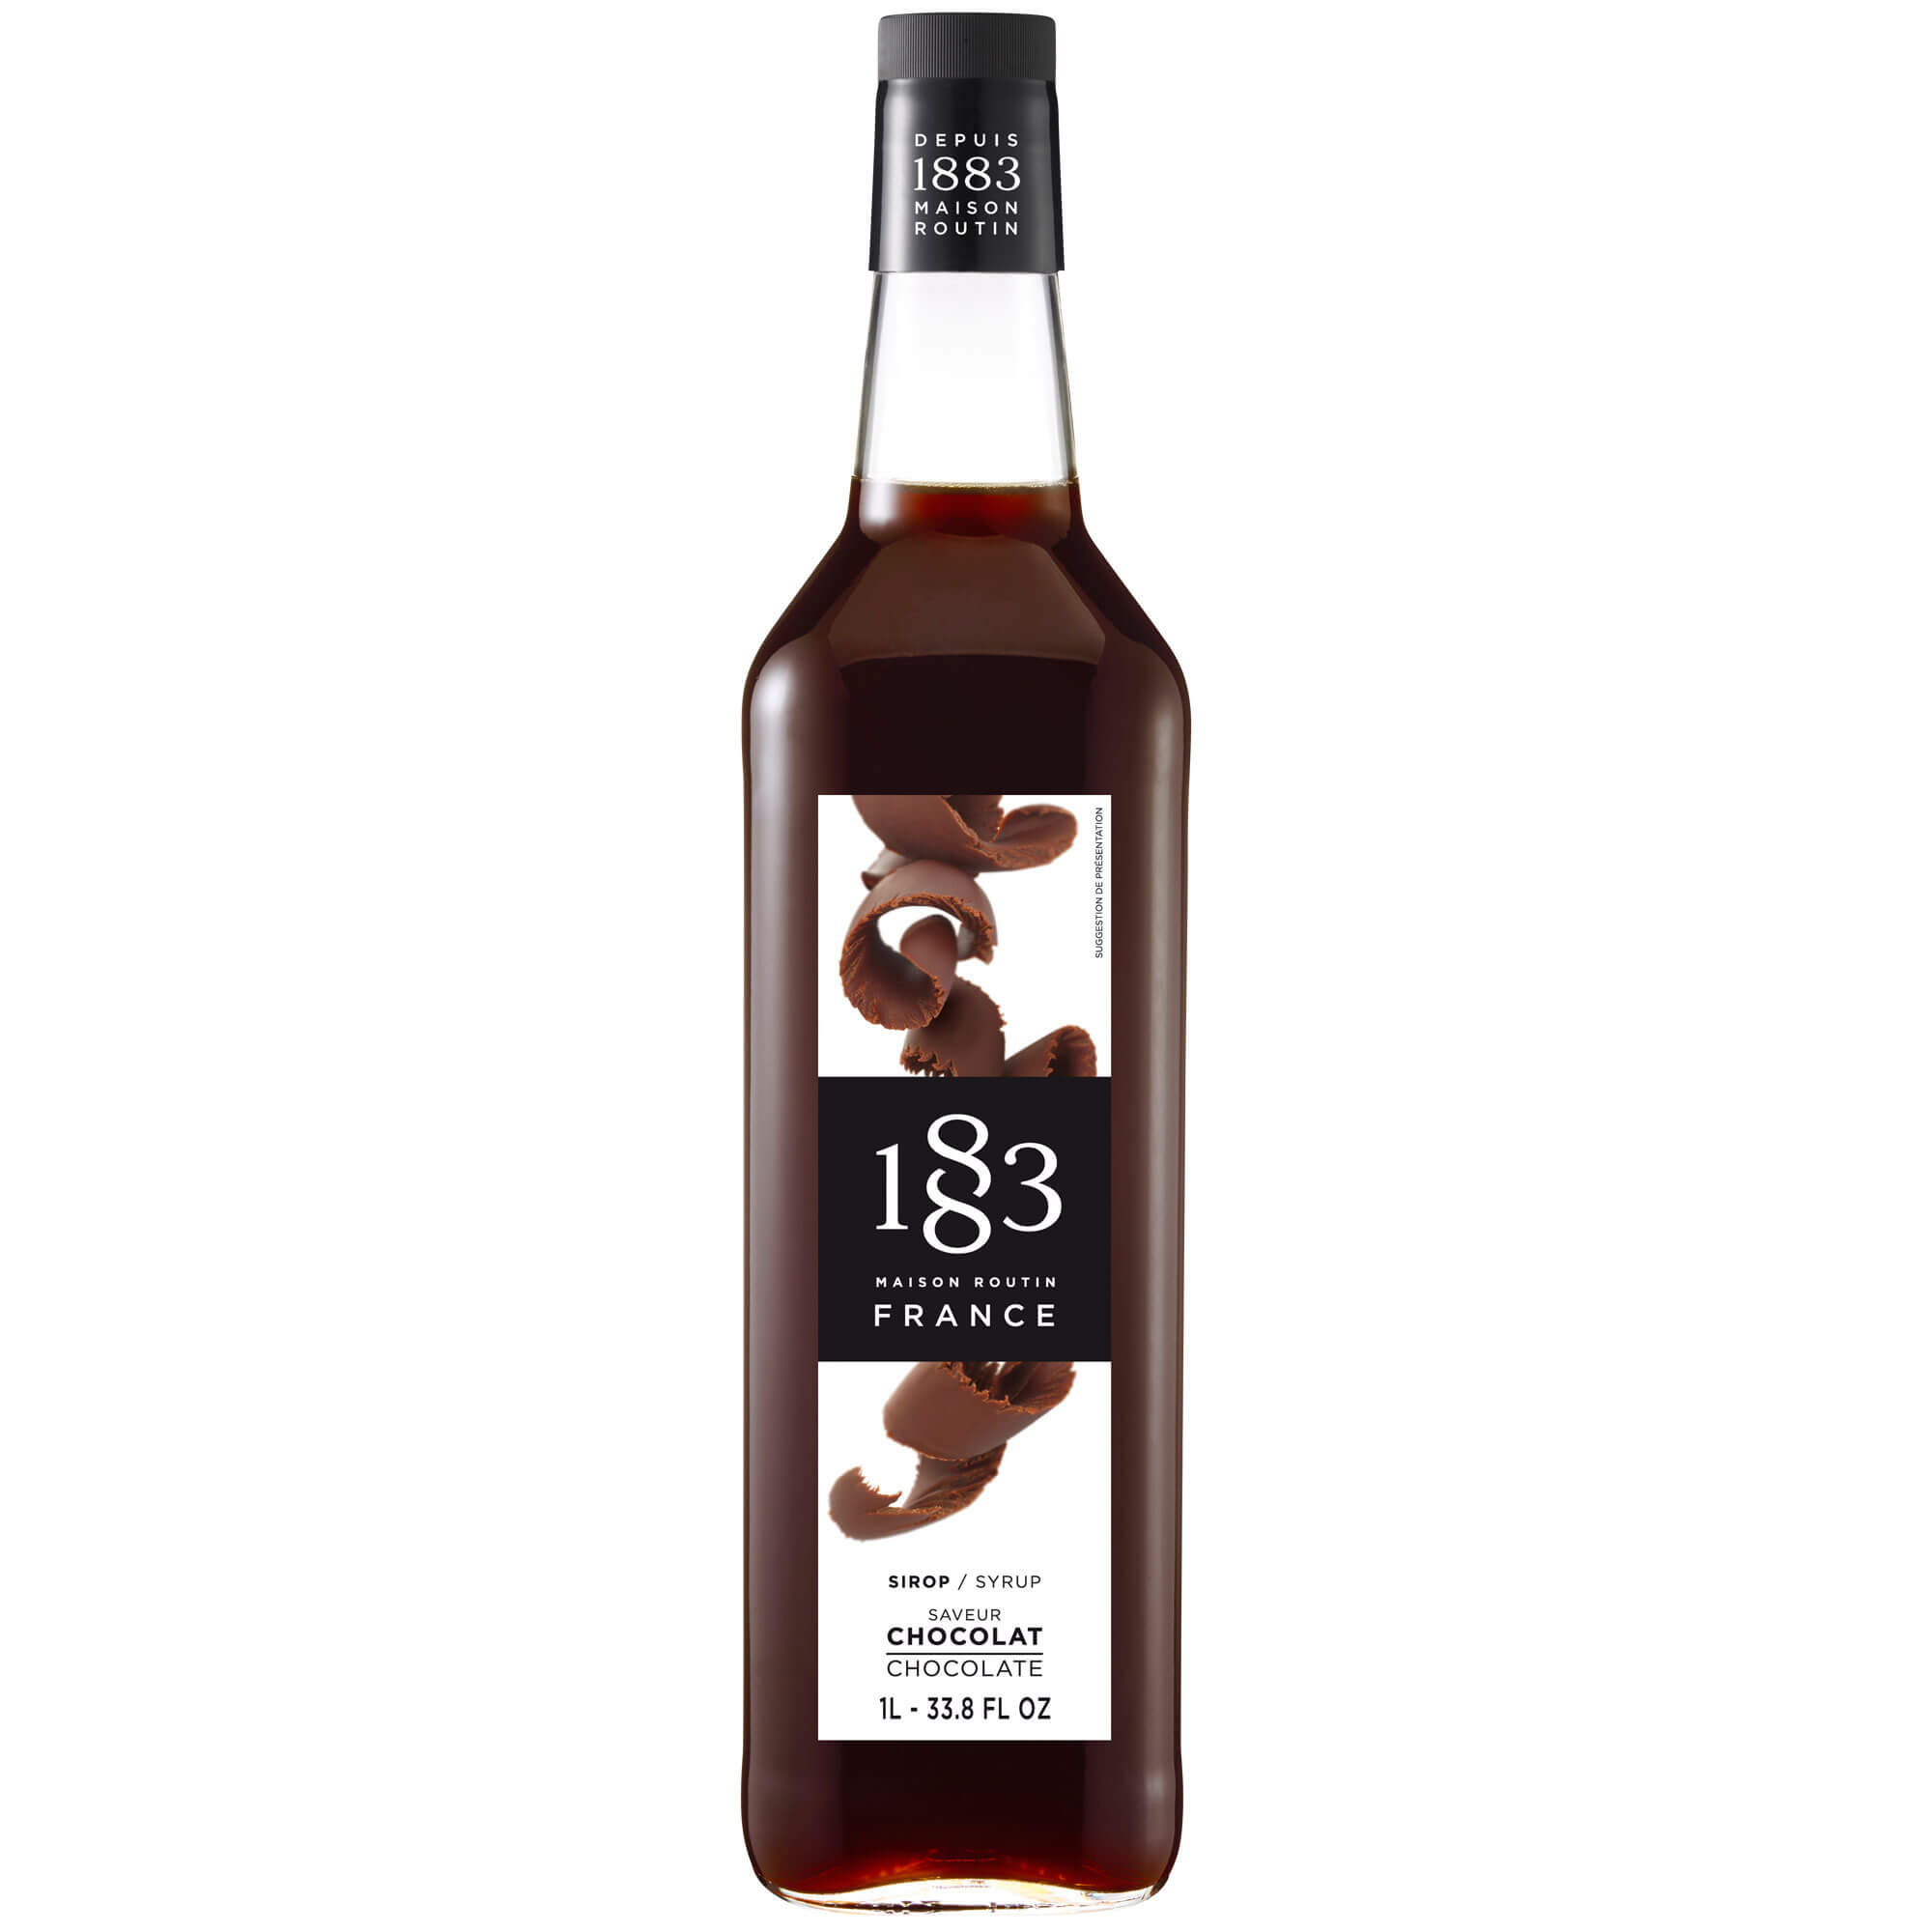 Chocolate - Maison Routin 1883 syrup (1,0l)